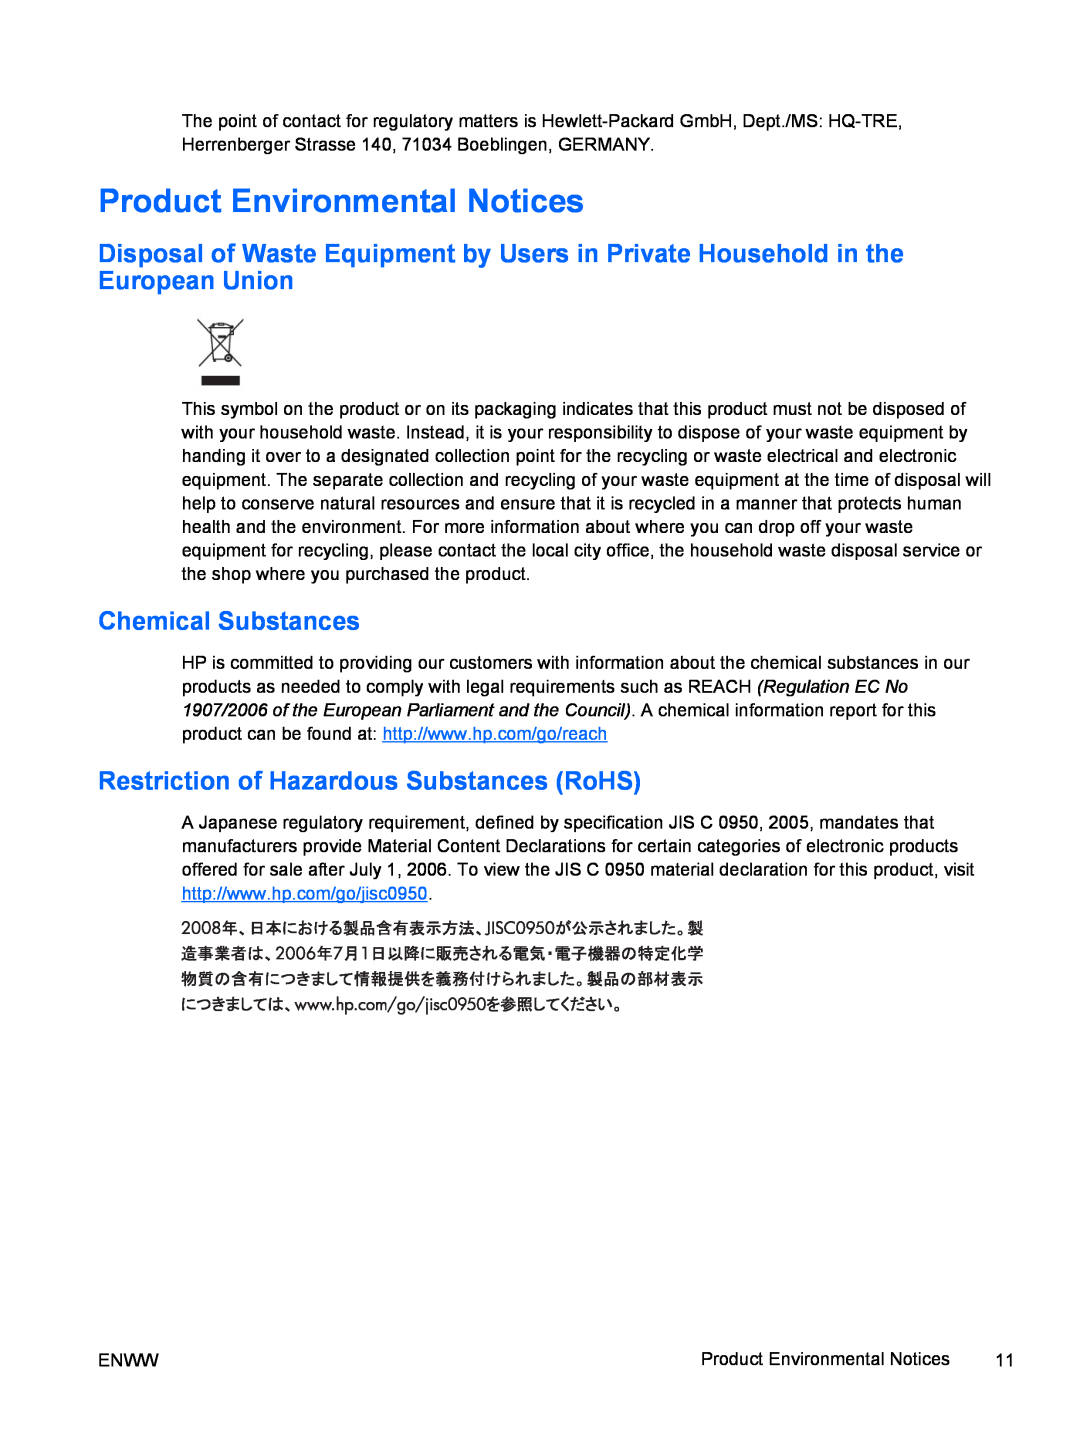 HP 8000 tower manual Product Environmental Notices, Chemical Substances, Restriction of Hazardous Substances RoHS 